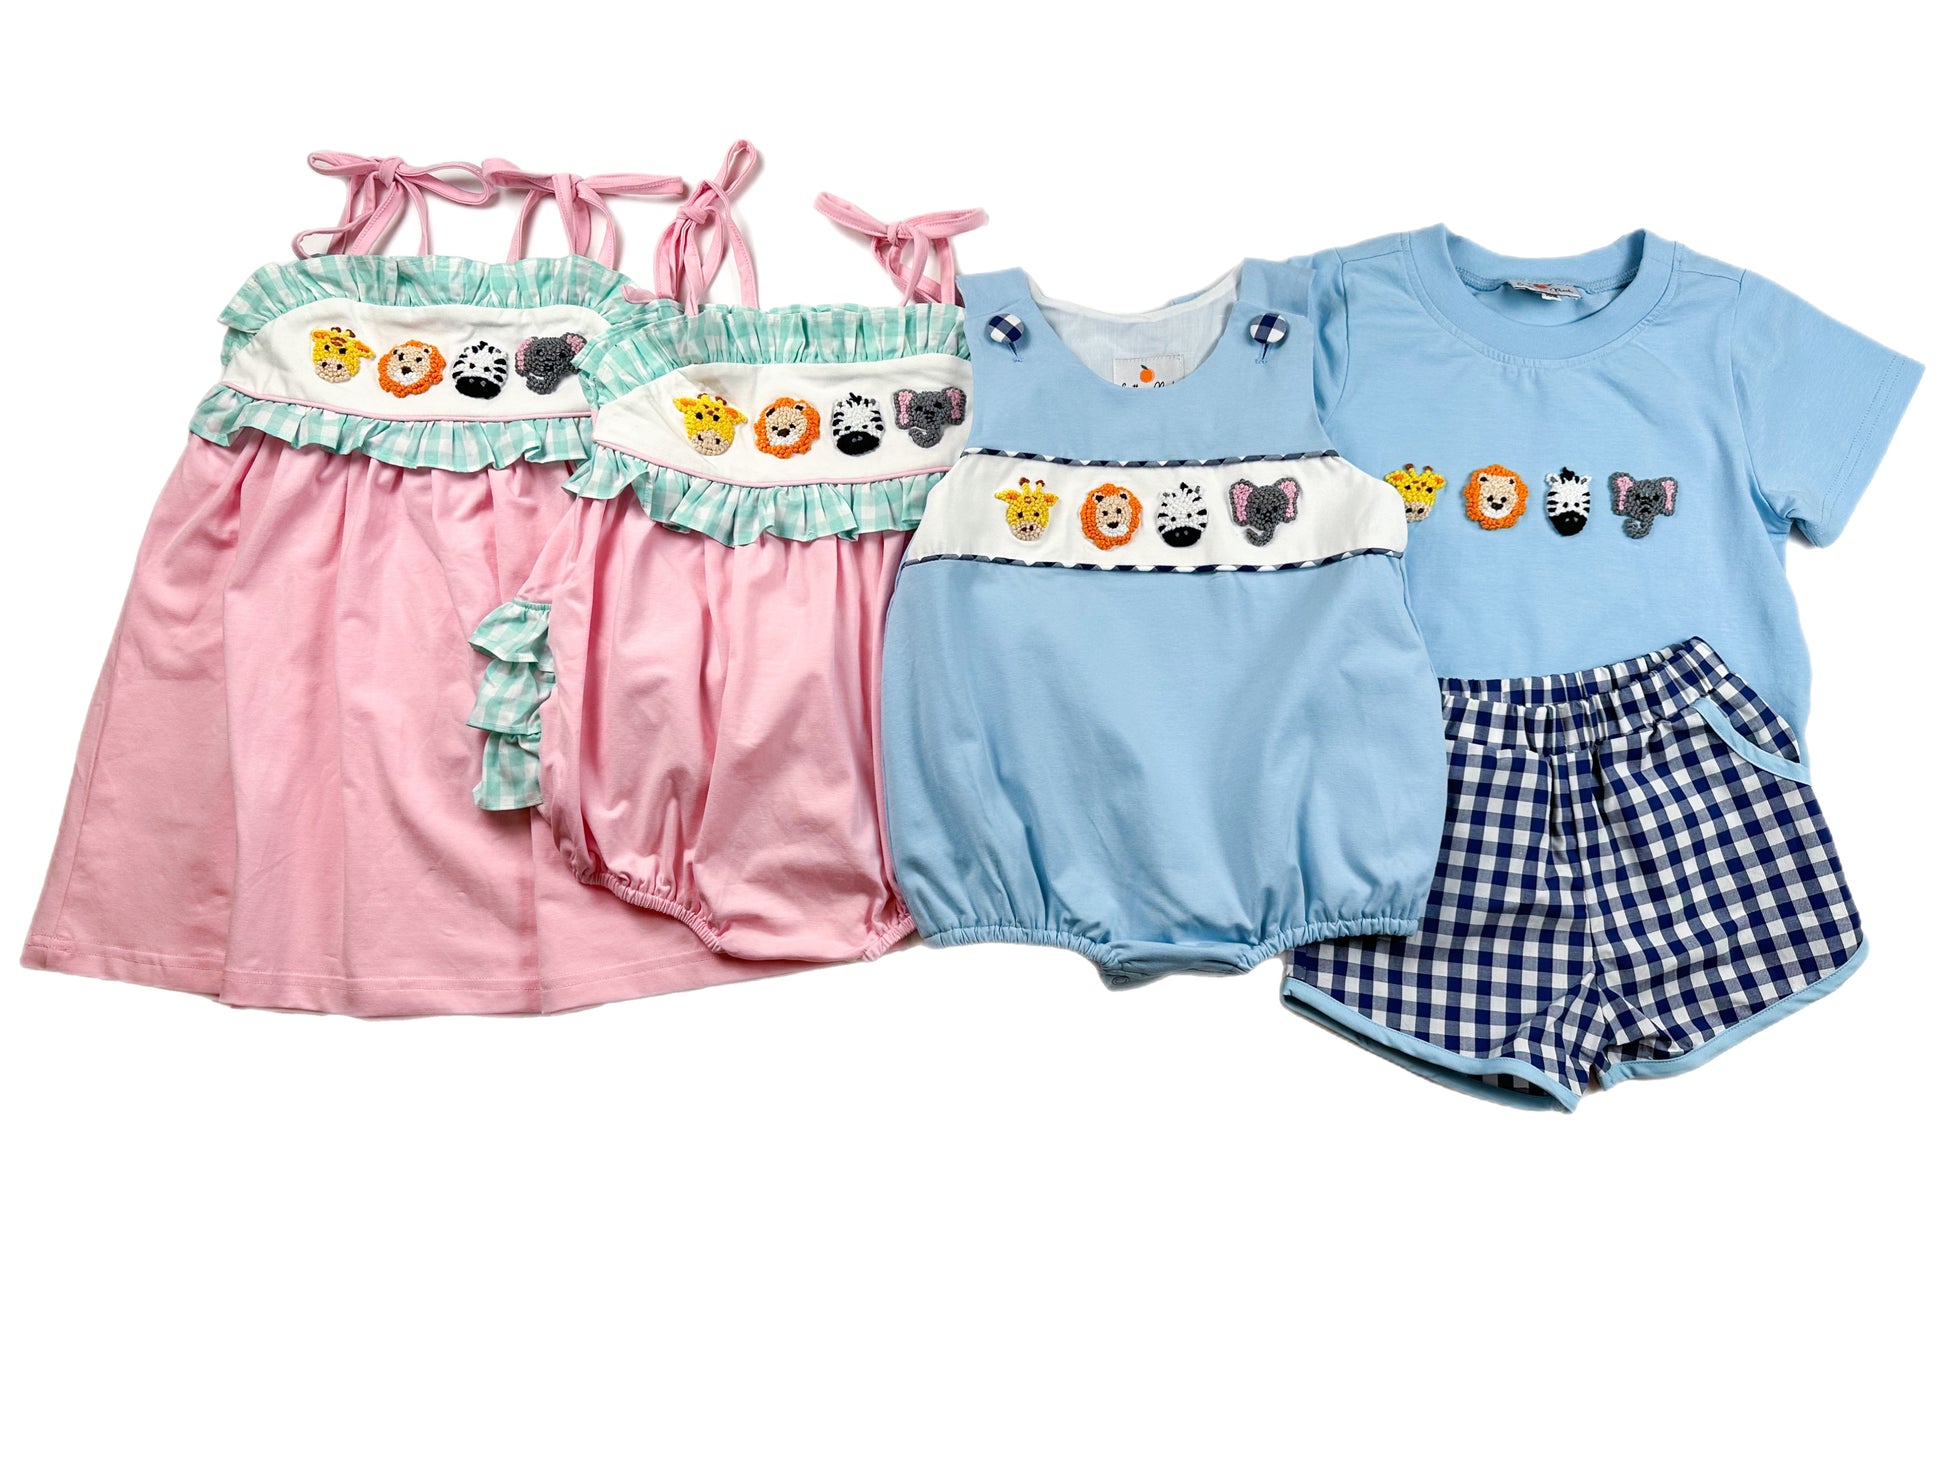 zoo outfits for kids